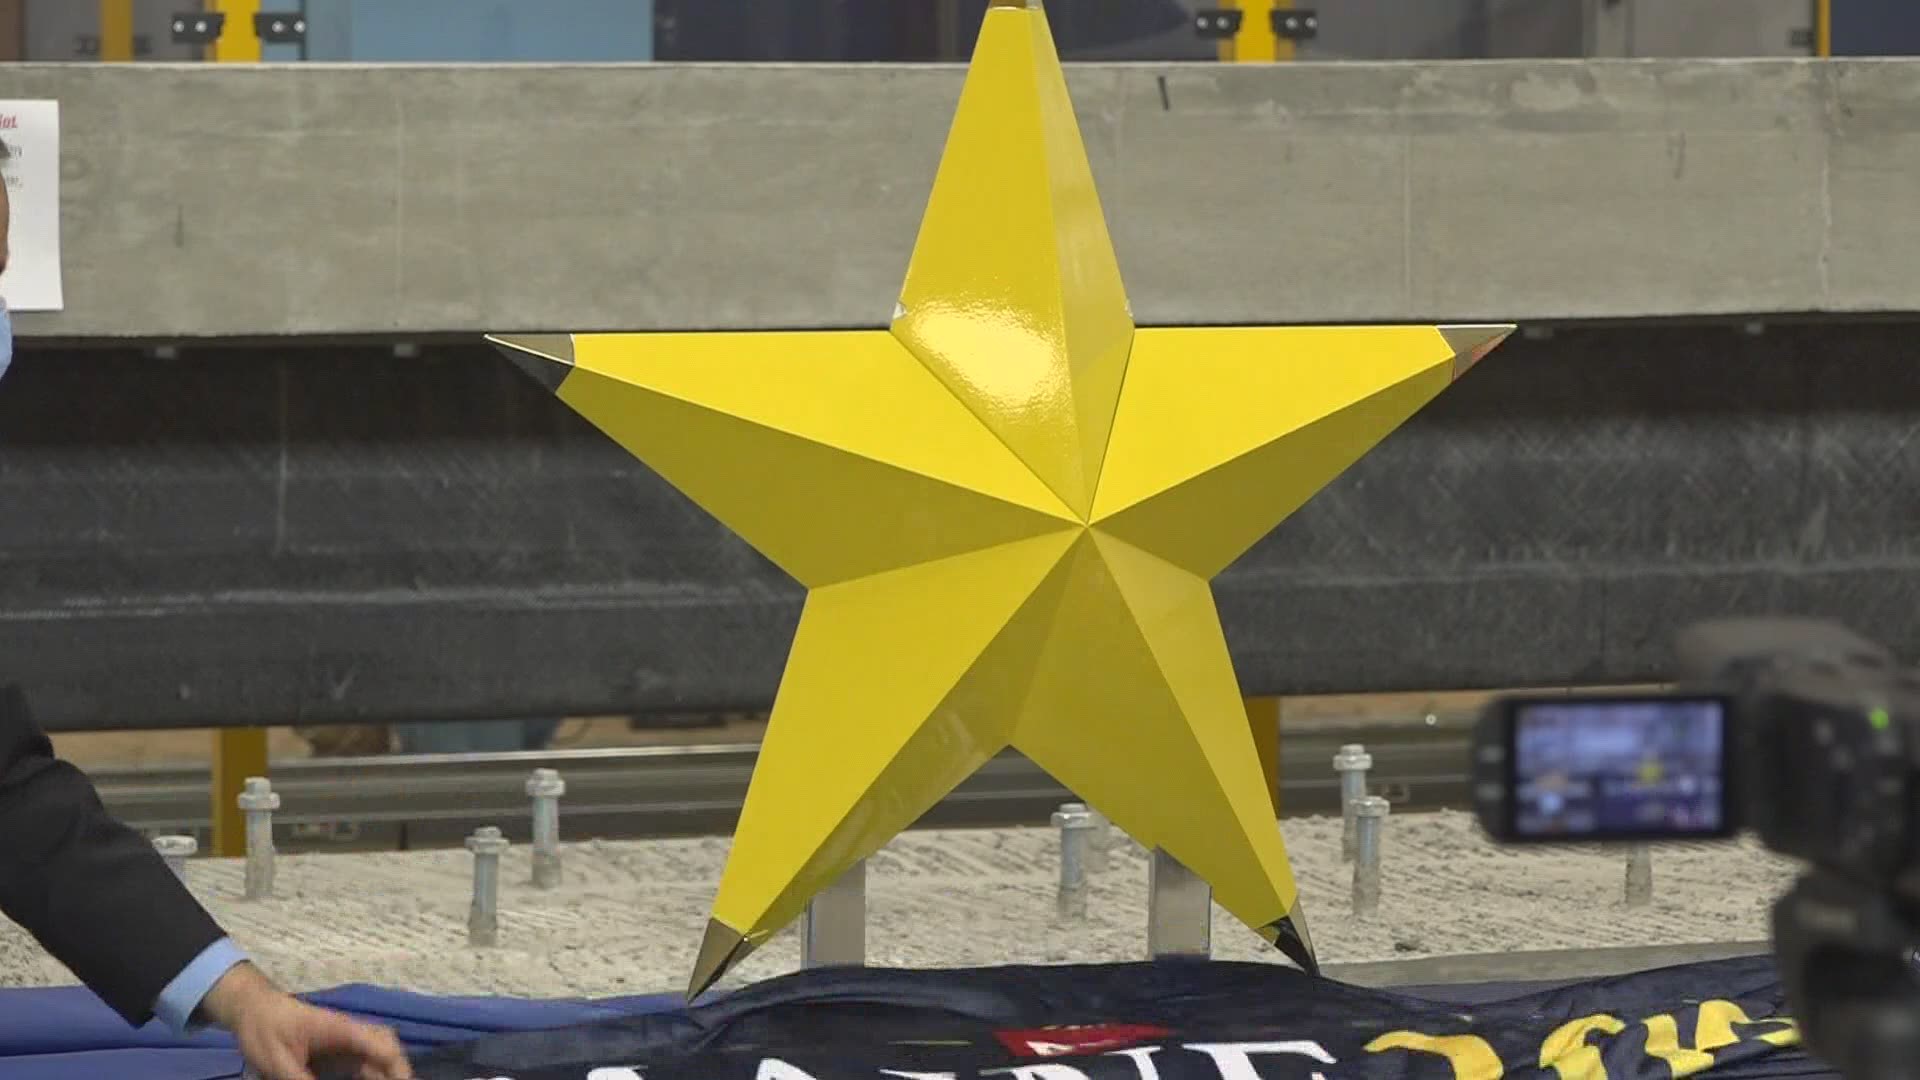 Maine turns 201 today and a team from the University of Maine's Advanced Structures and Composites Center has been working hard on a 3-D printed Dirigo Star